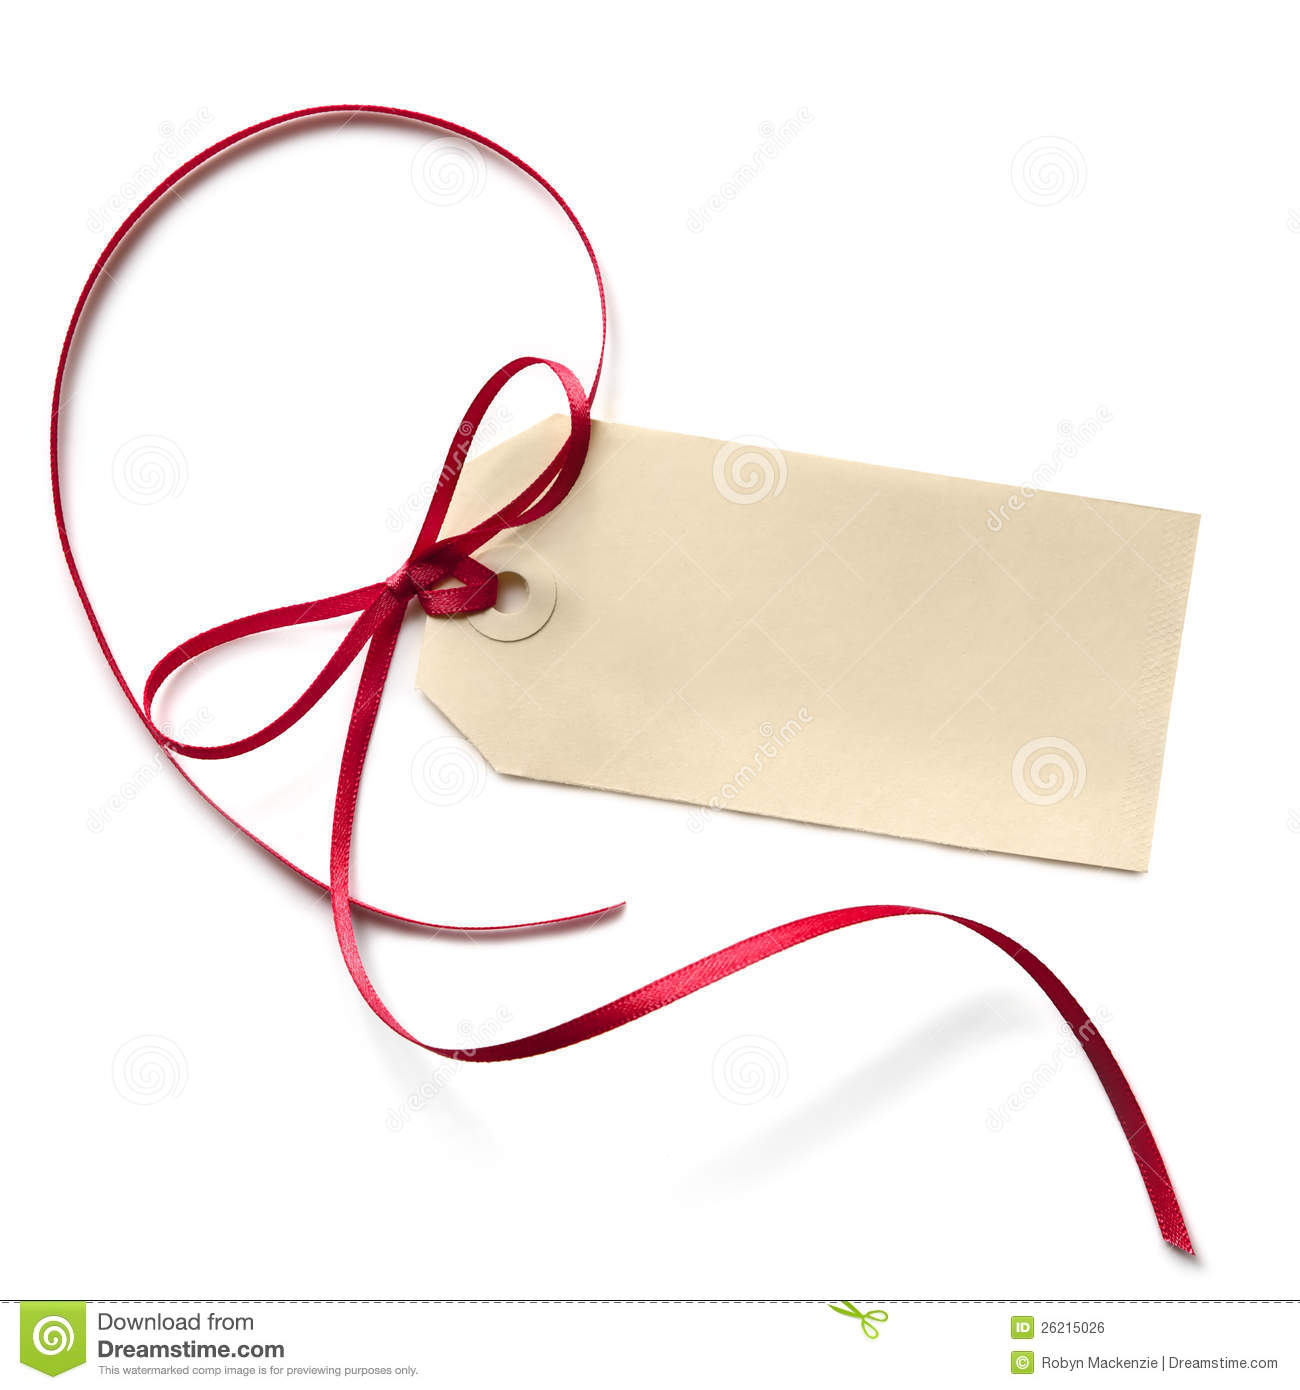 Blank Gift Tag With Red Ribbon Royalty Free Stock Image   Image